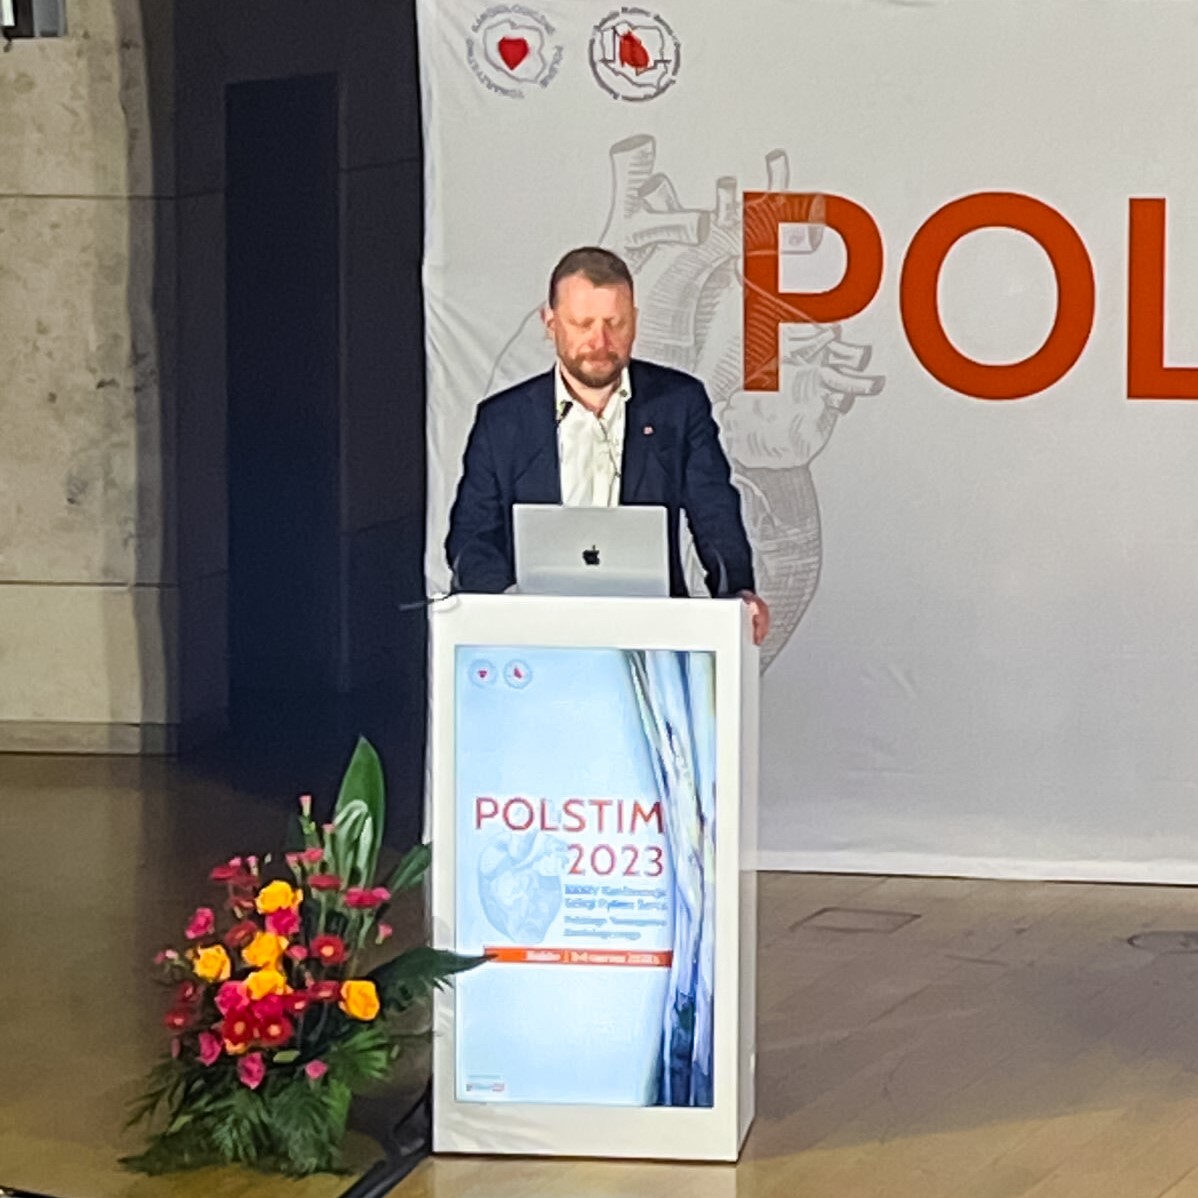 Magnetic navigation for patients with #CongenitalHeartDefects 🤖💓
Thank you Prof. @SzumowskiLukasz for your engaging presentation on your experience using #RoboticEP to navigate tortuous anatomy during #POLSTIM2023 in Cracow, Poland. 🇵🇱

#Cardiology #GlobalEP #EPeeps #MedTech